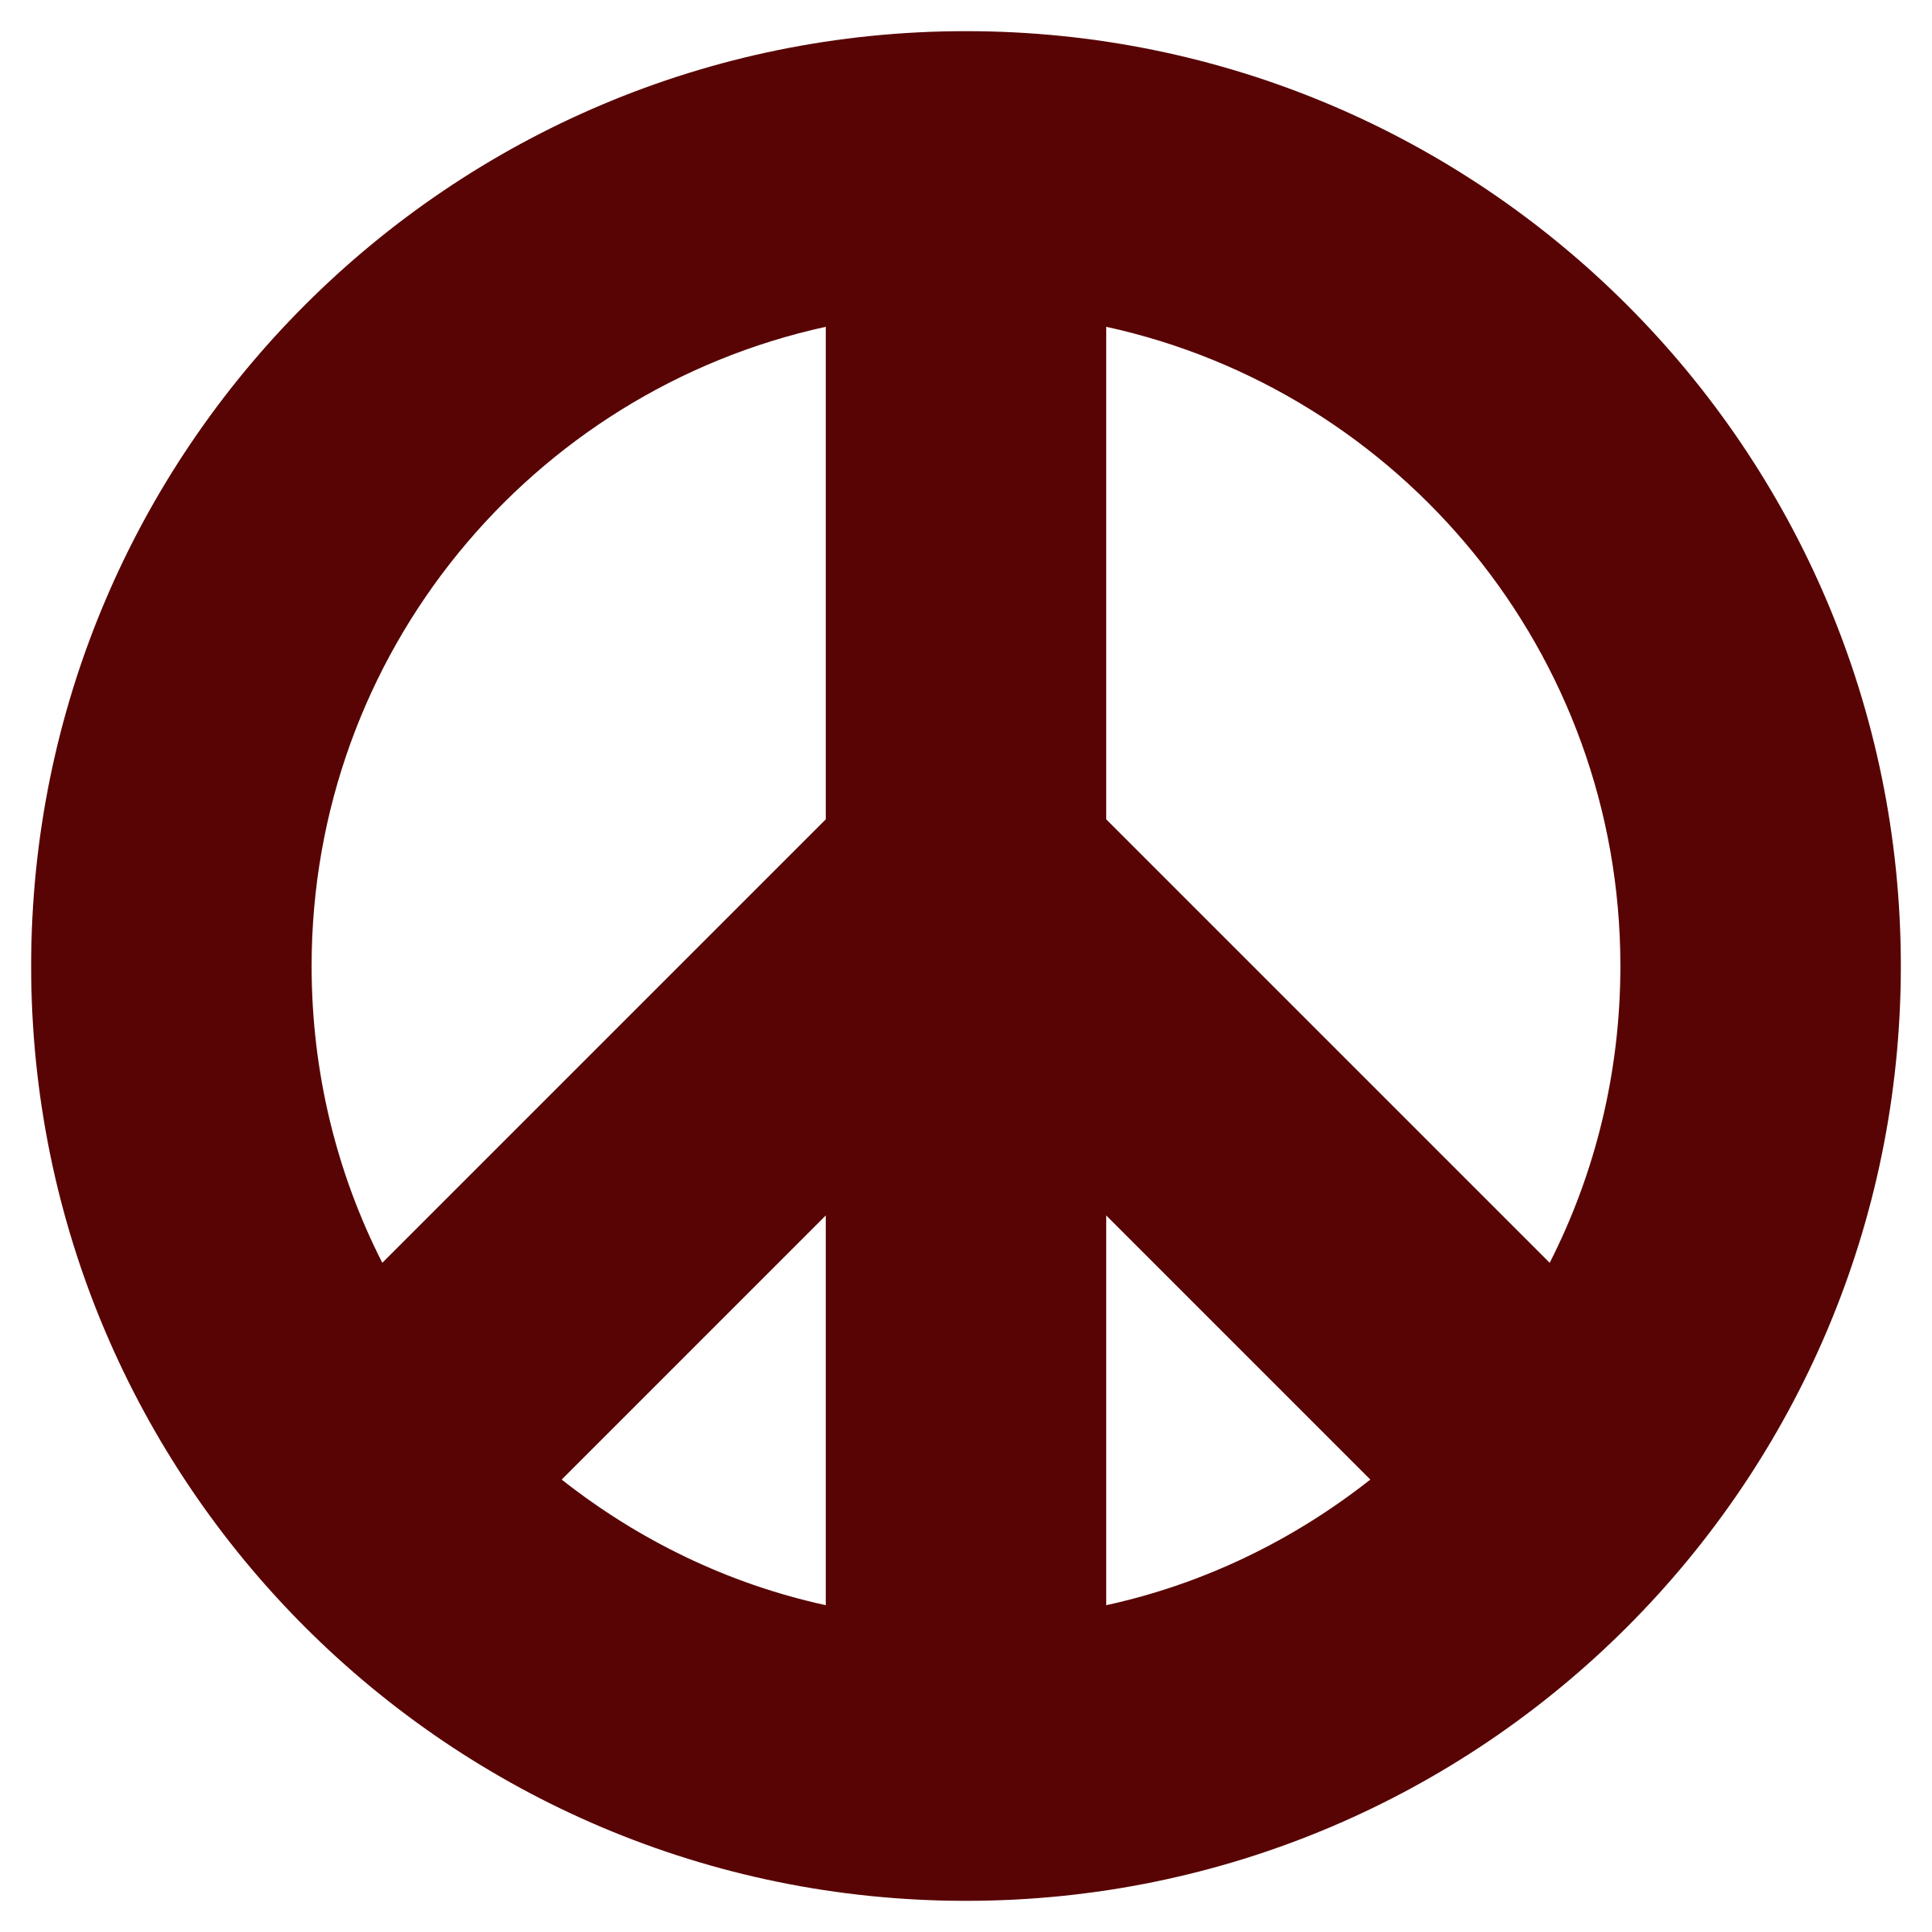 Clipart peace sign